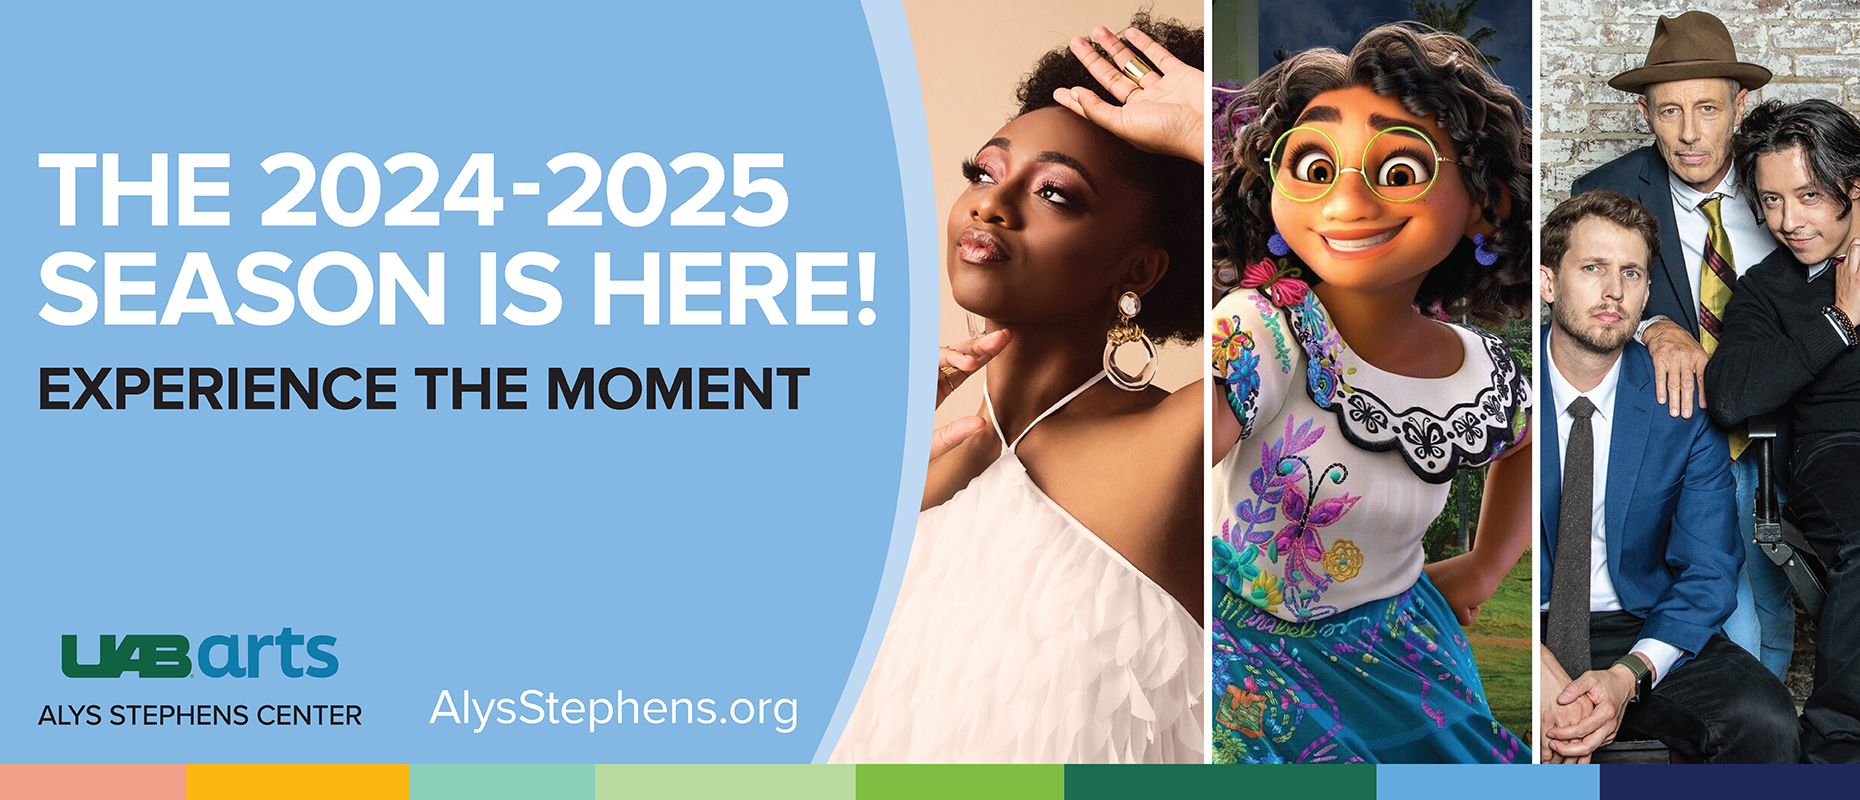 The 2024-2025 season is here! Experience the moment. UAB Arts: Alys Stephens Center.